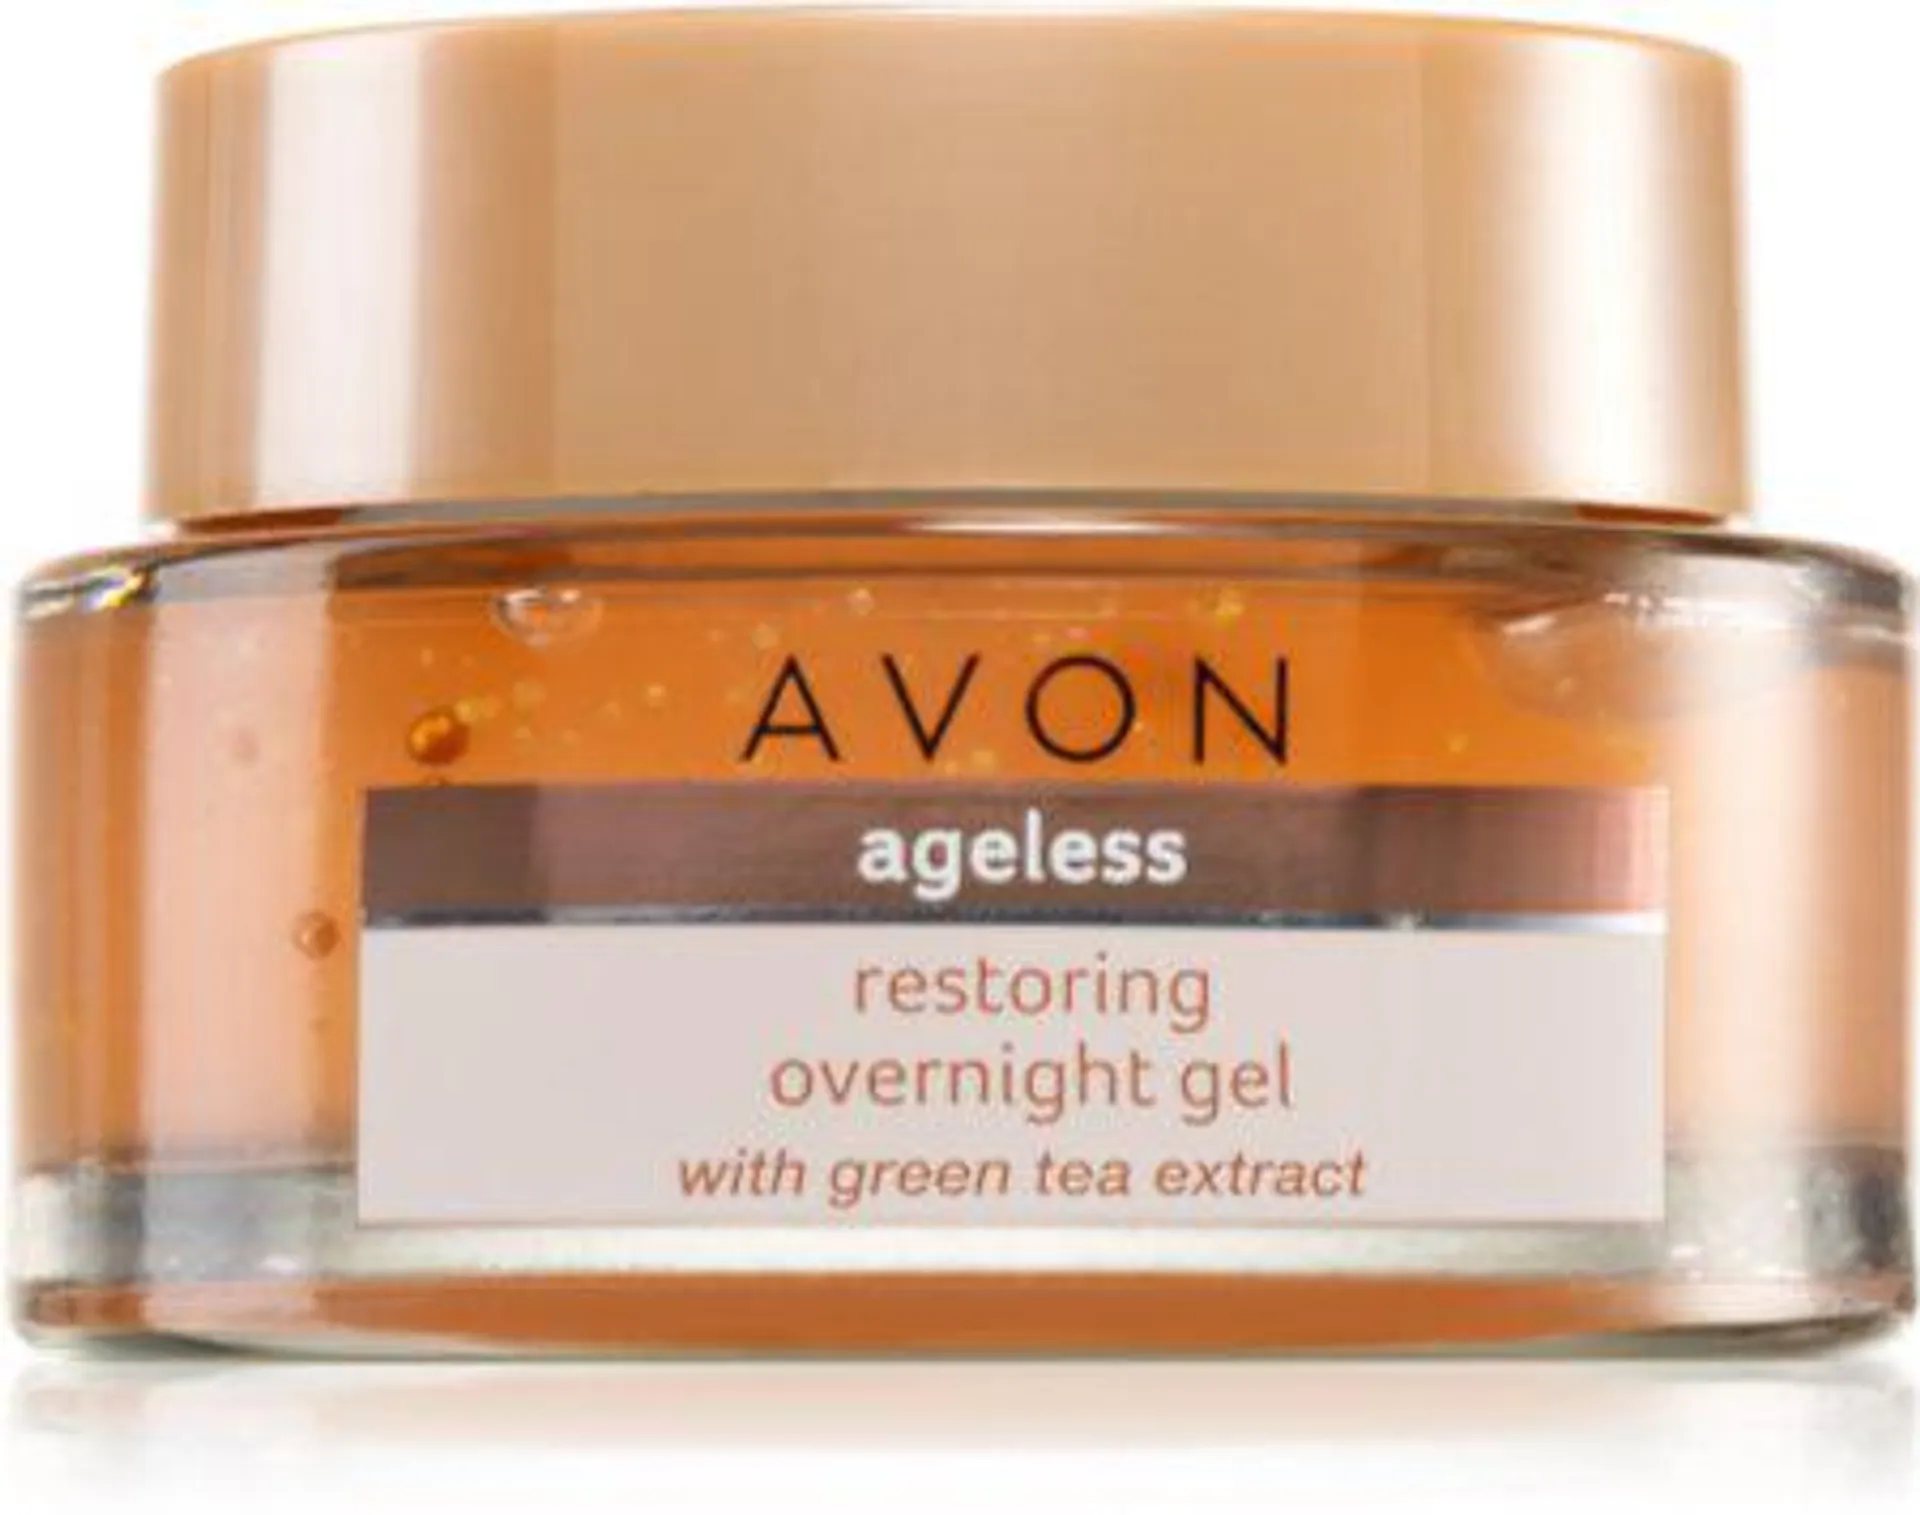 Renewing Night Care with green tea extract